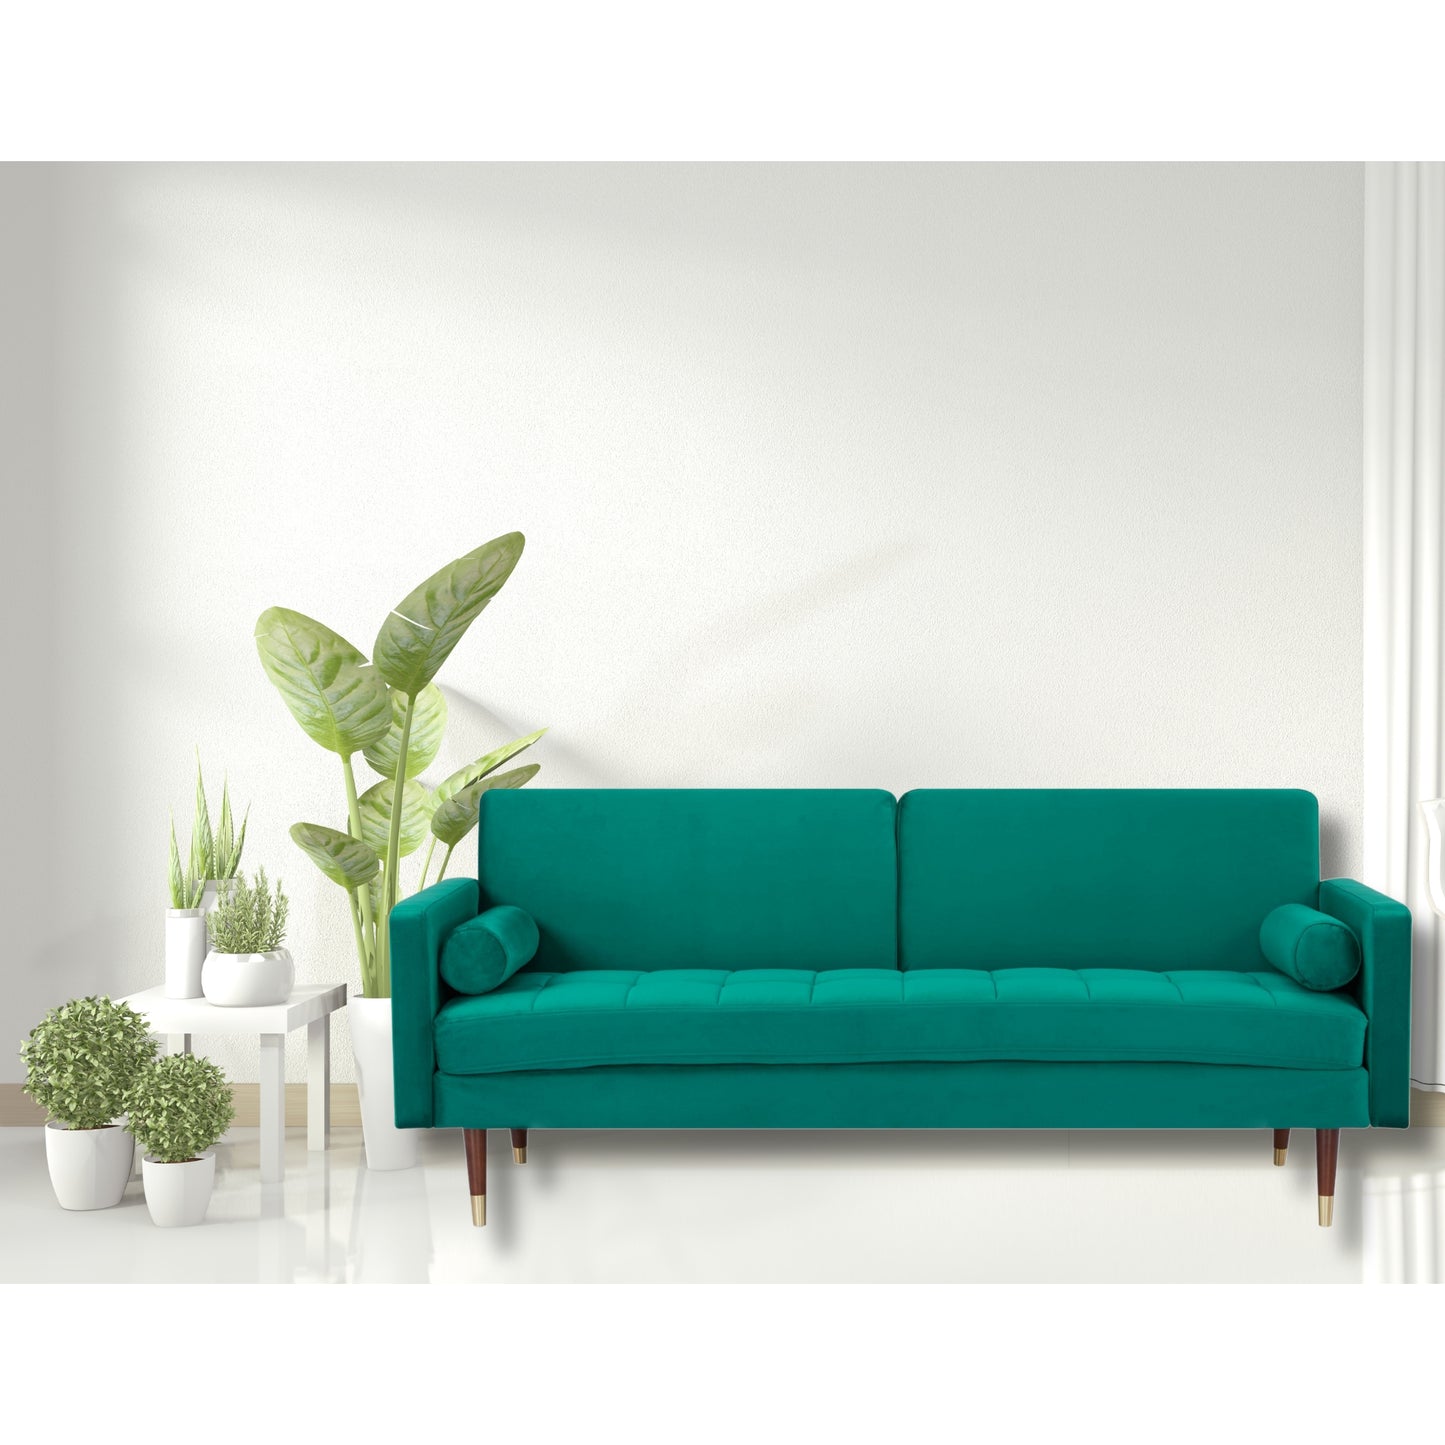 Livia 3 Seater Sofa Bed Fabric Uplholstered Lounge Couch - Green